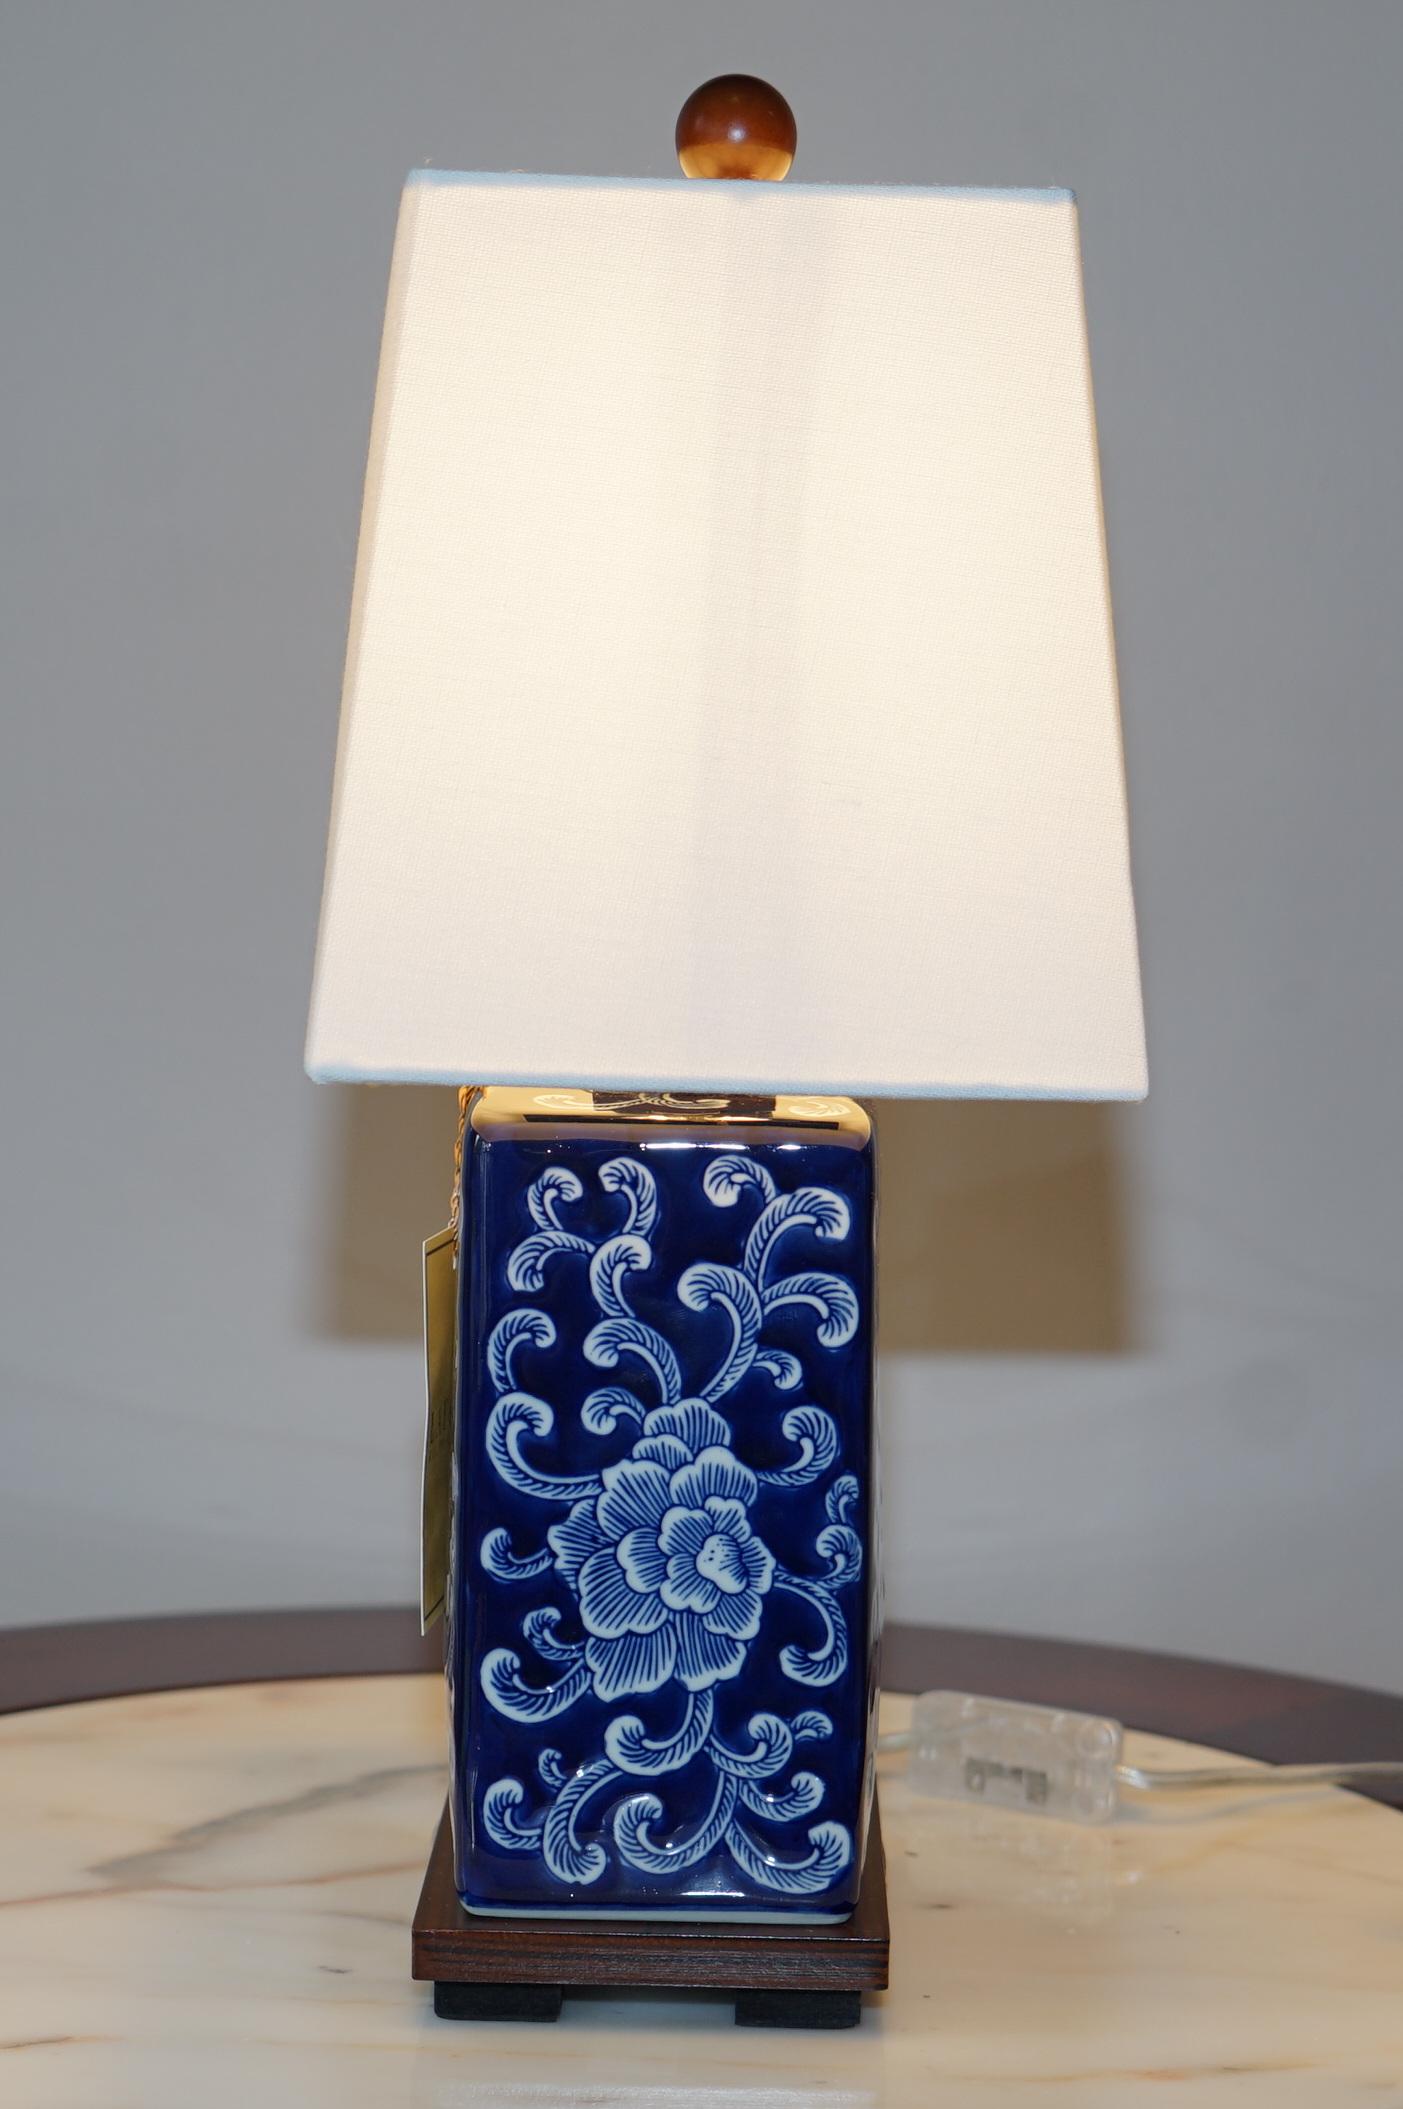 American Pair of Ralph Lauren Blue Chinese Porcelain Table Lamps Stunning Chinese Design